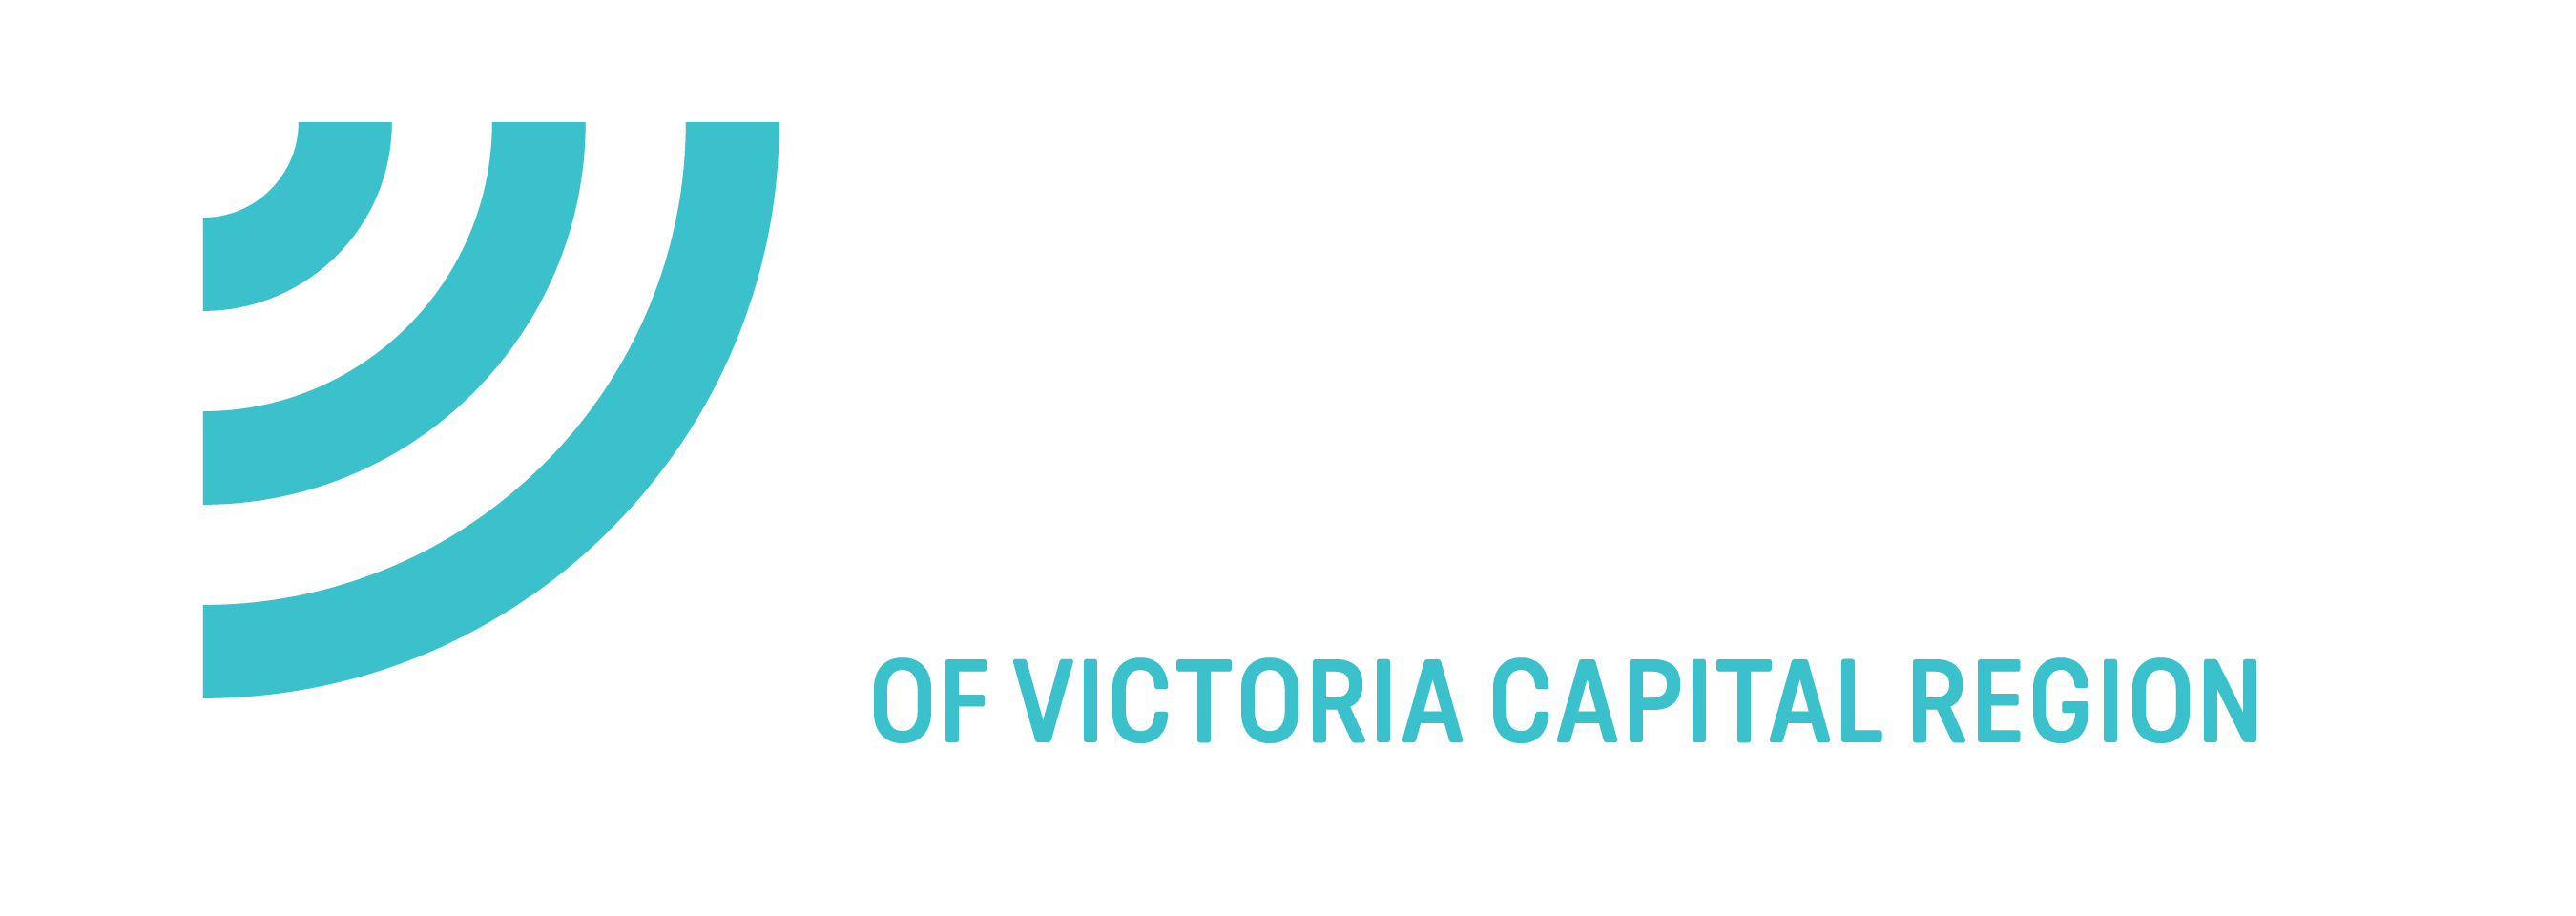 News - Page 2 of 3 - Big Brothers Big Sisters of Victoria Capital Region